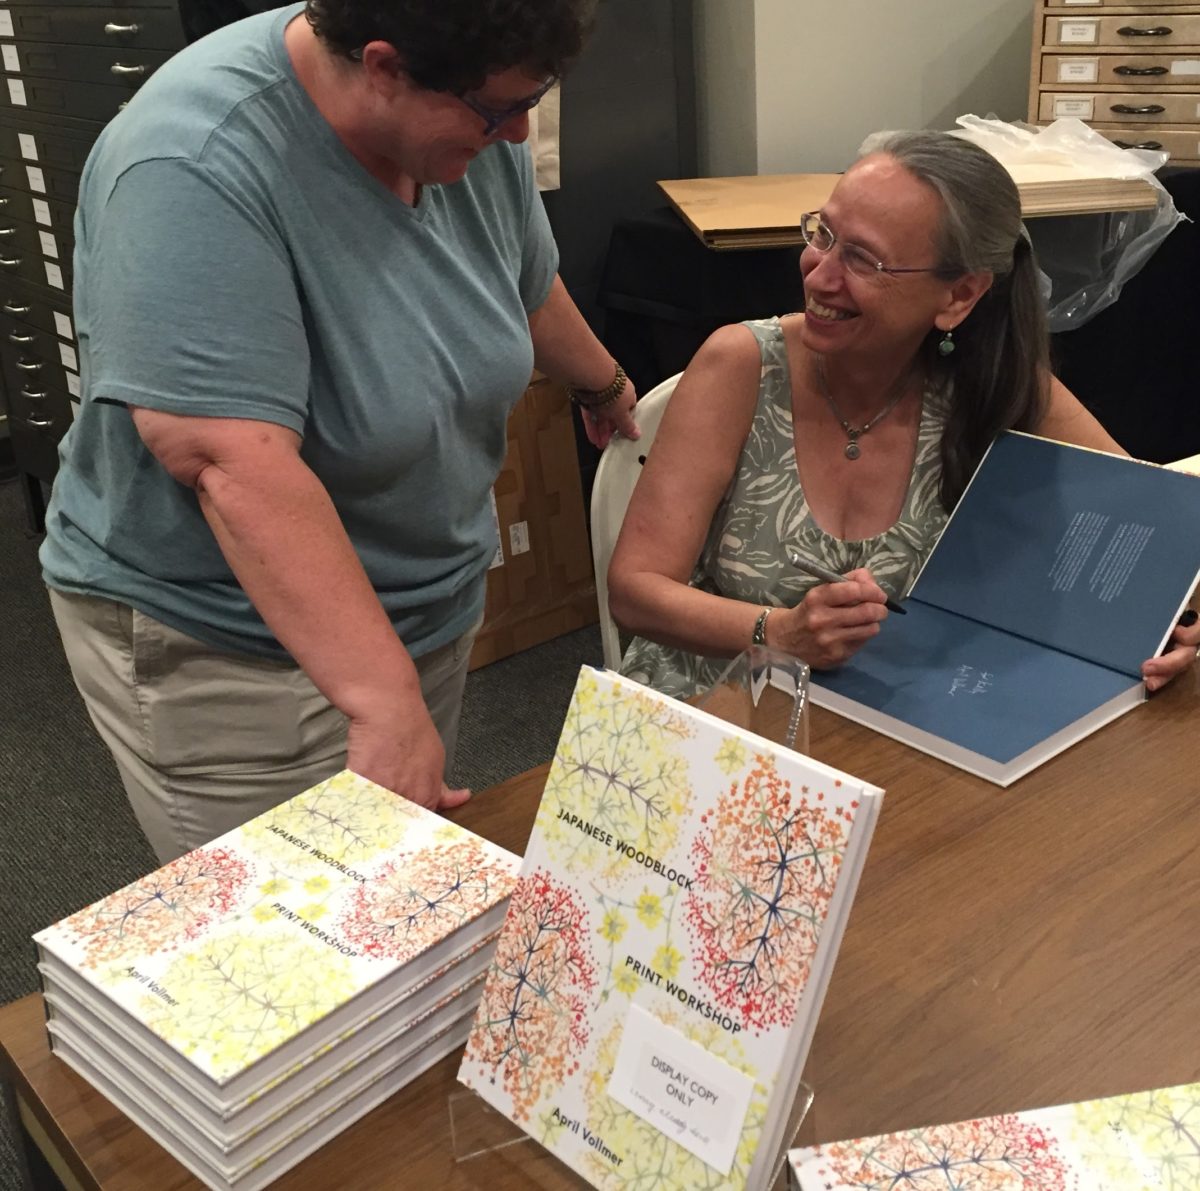 2016 Morgan Conservatory Class, Talk and Book Signing